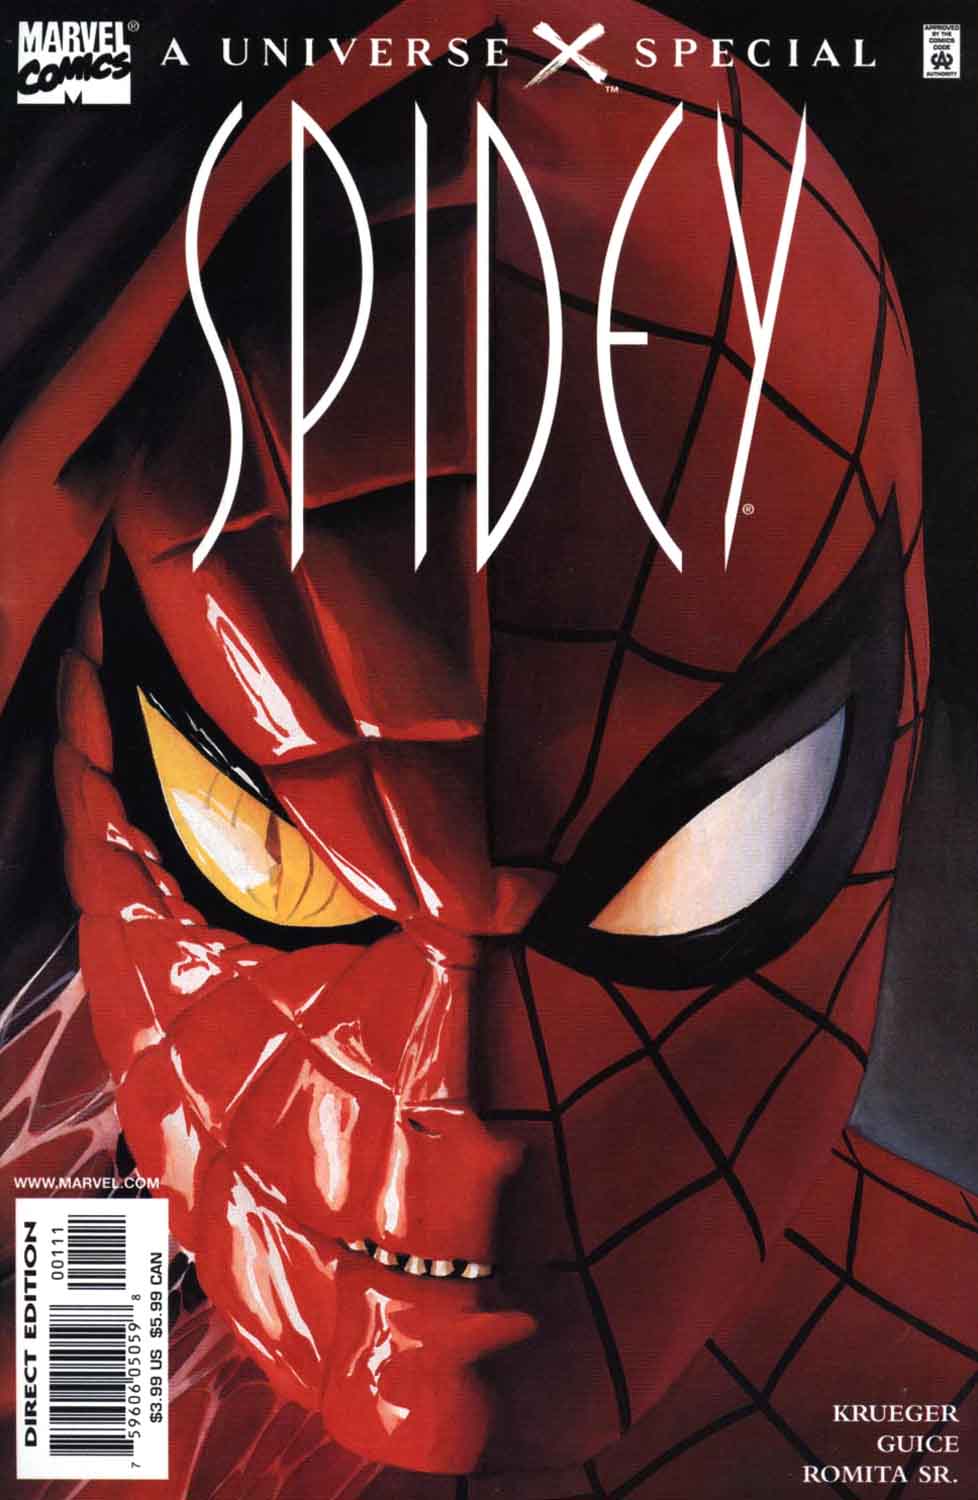 Read online Universe X: Spidey comic -  Issue # Full - 1